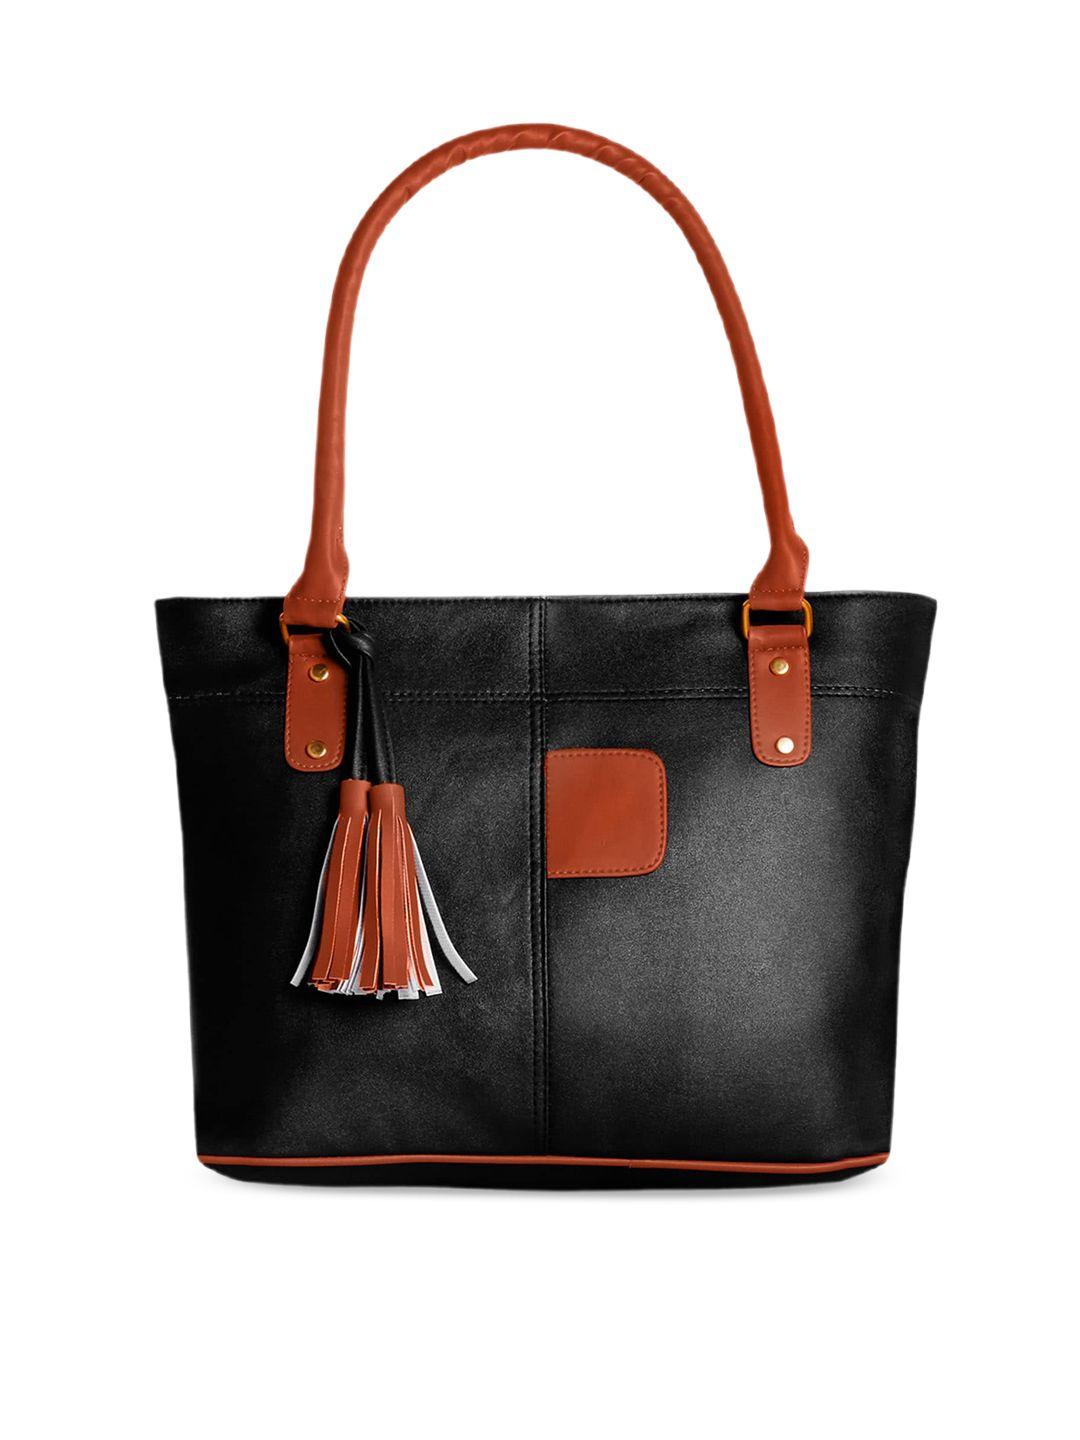 the mini needle structured shoulder bag with tasselled